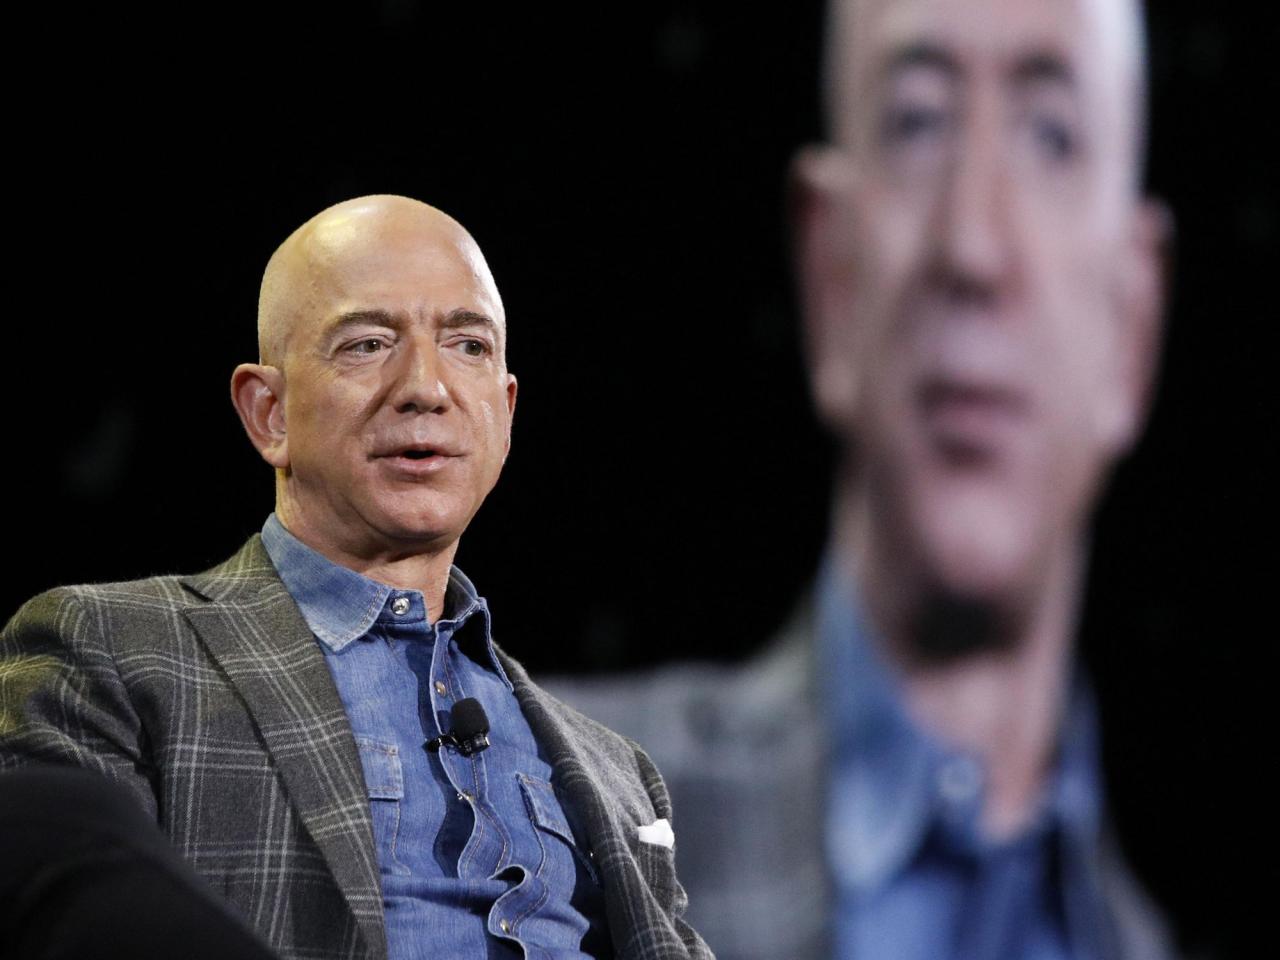 Jeff Bezos has recently sold nearly 12 million shares of Amazon, which are valued at a minimum of $2 billion, and is expected to sell more in the future.